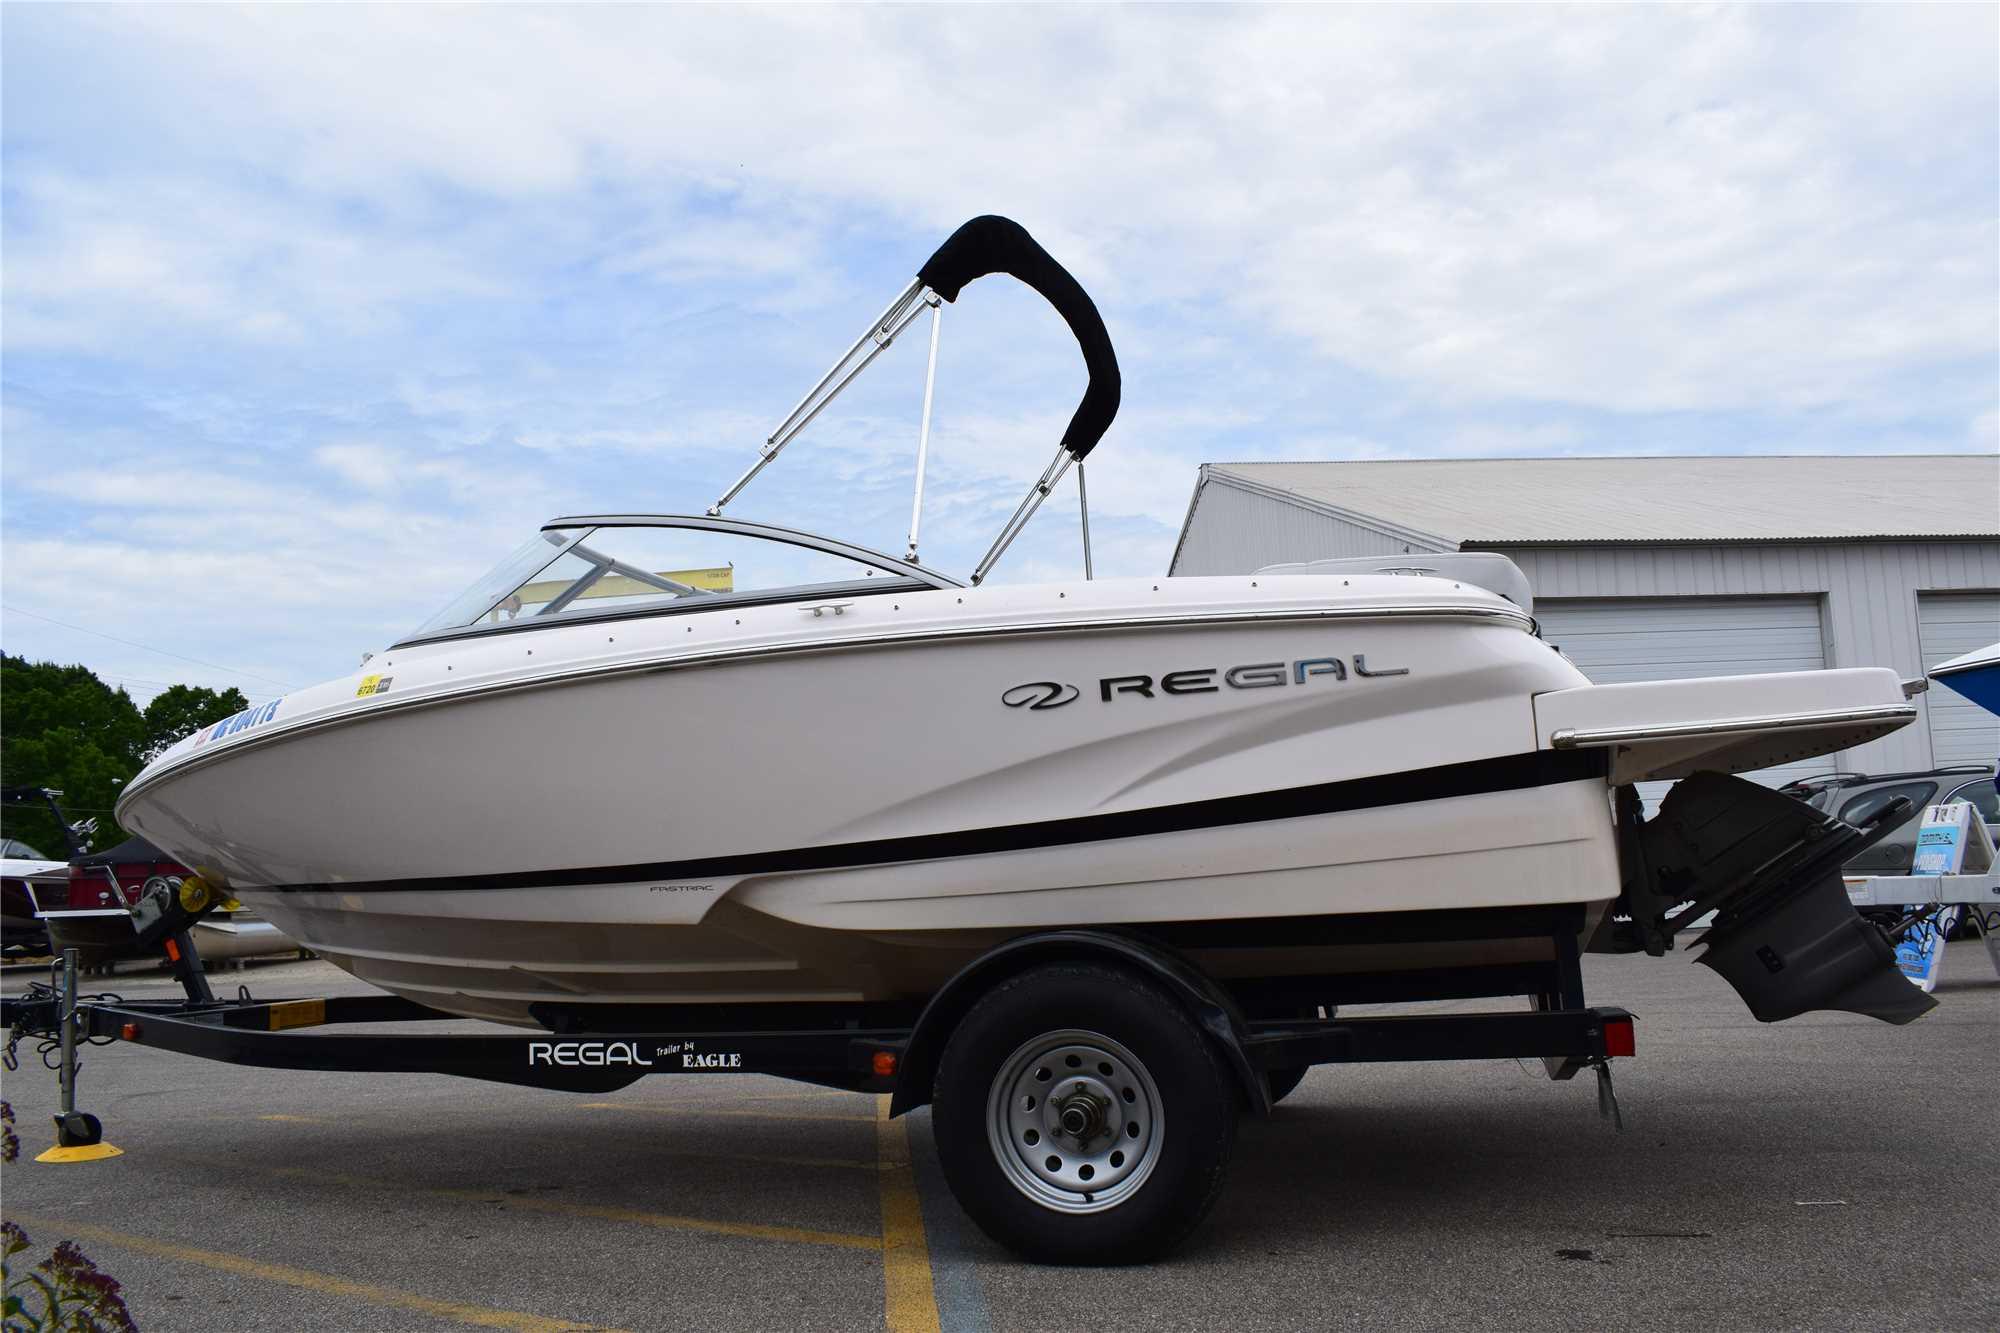 2014 Regal Model: 1900 ESX. VIN:RGMBV114A414. Hours: 189. This boat is located in Grand Rapids, MI.